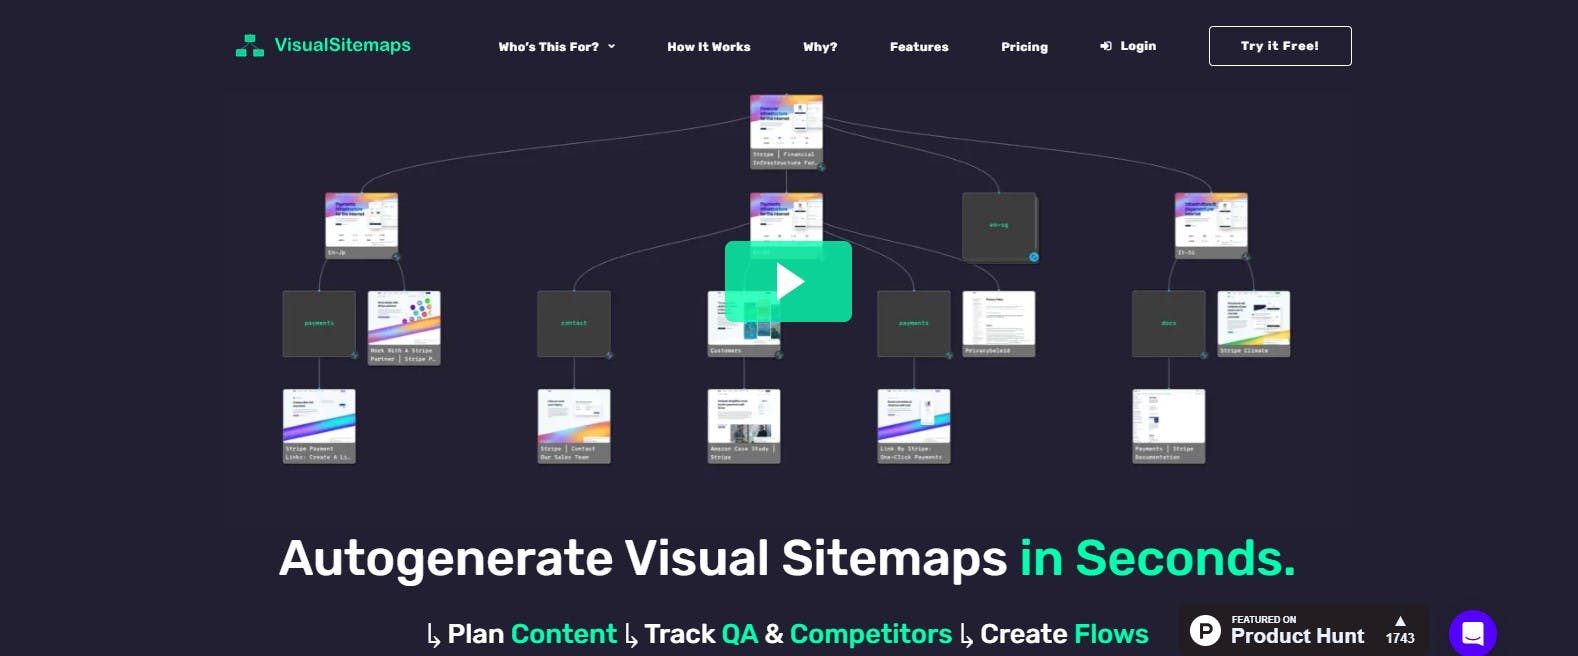 VisualSitemaps for generating visual sitemaps quickly